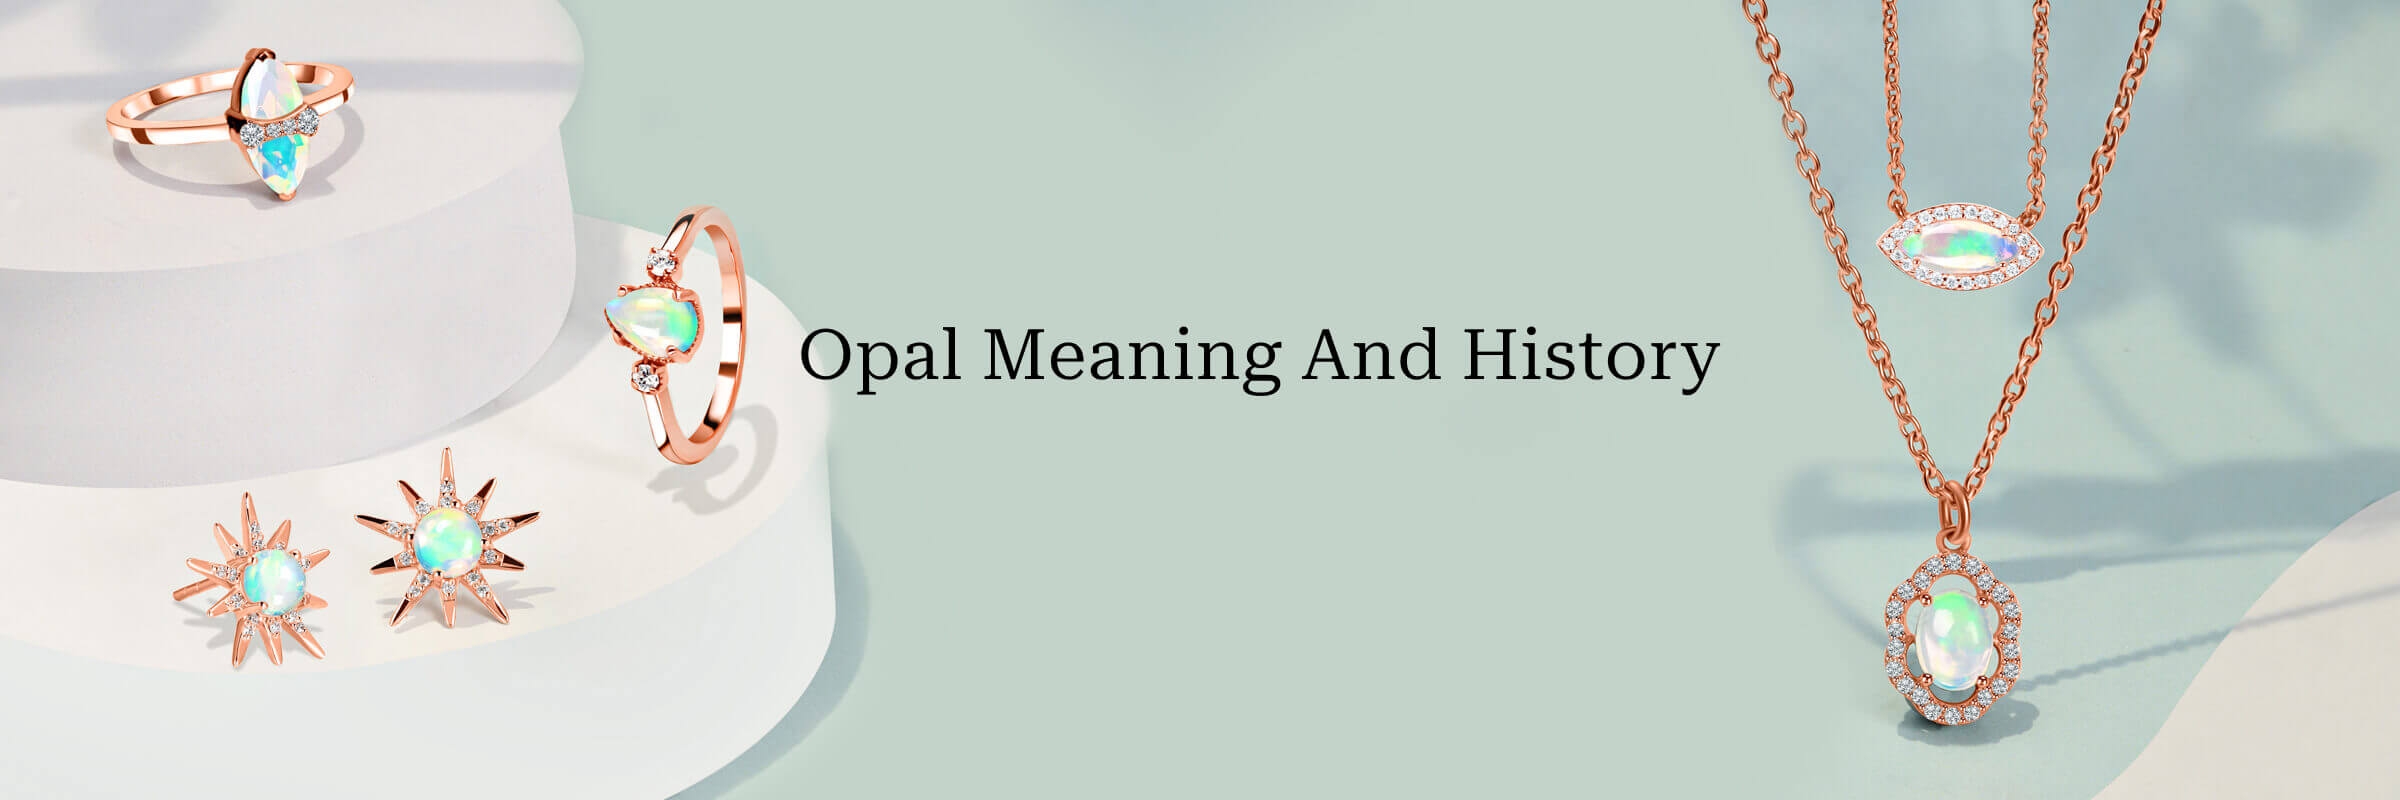 Opal Meaning And History